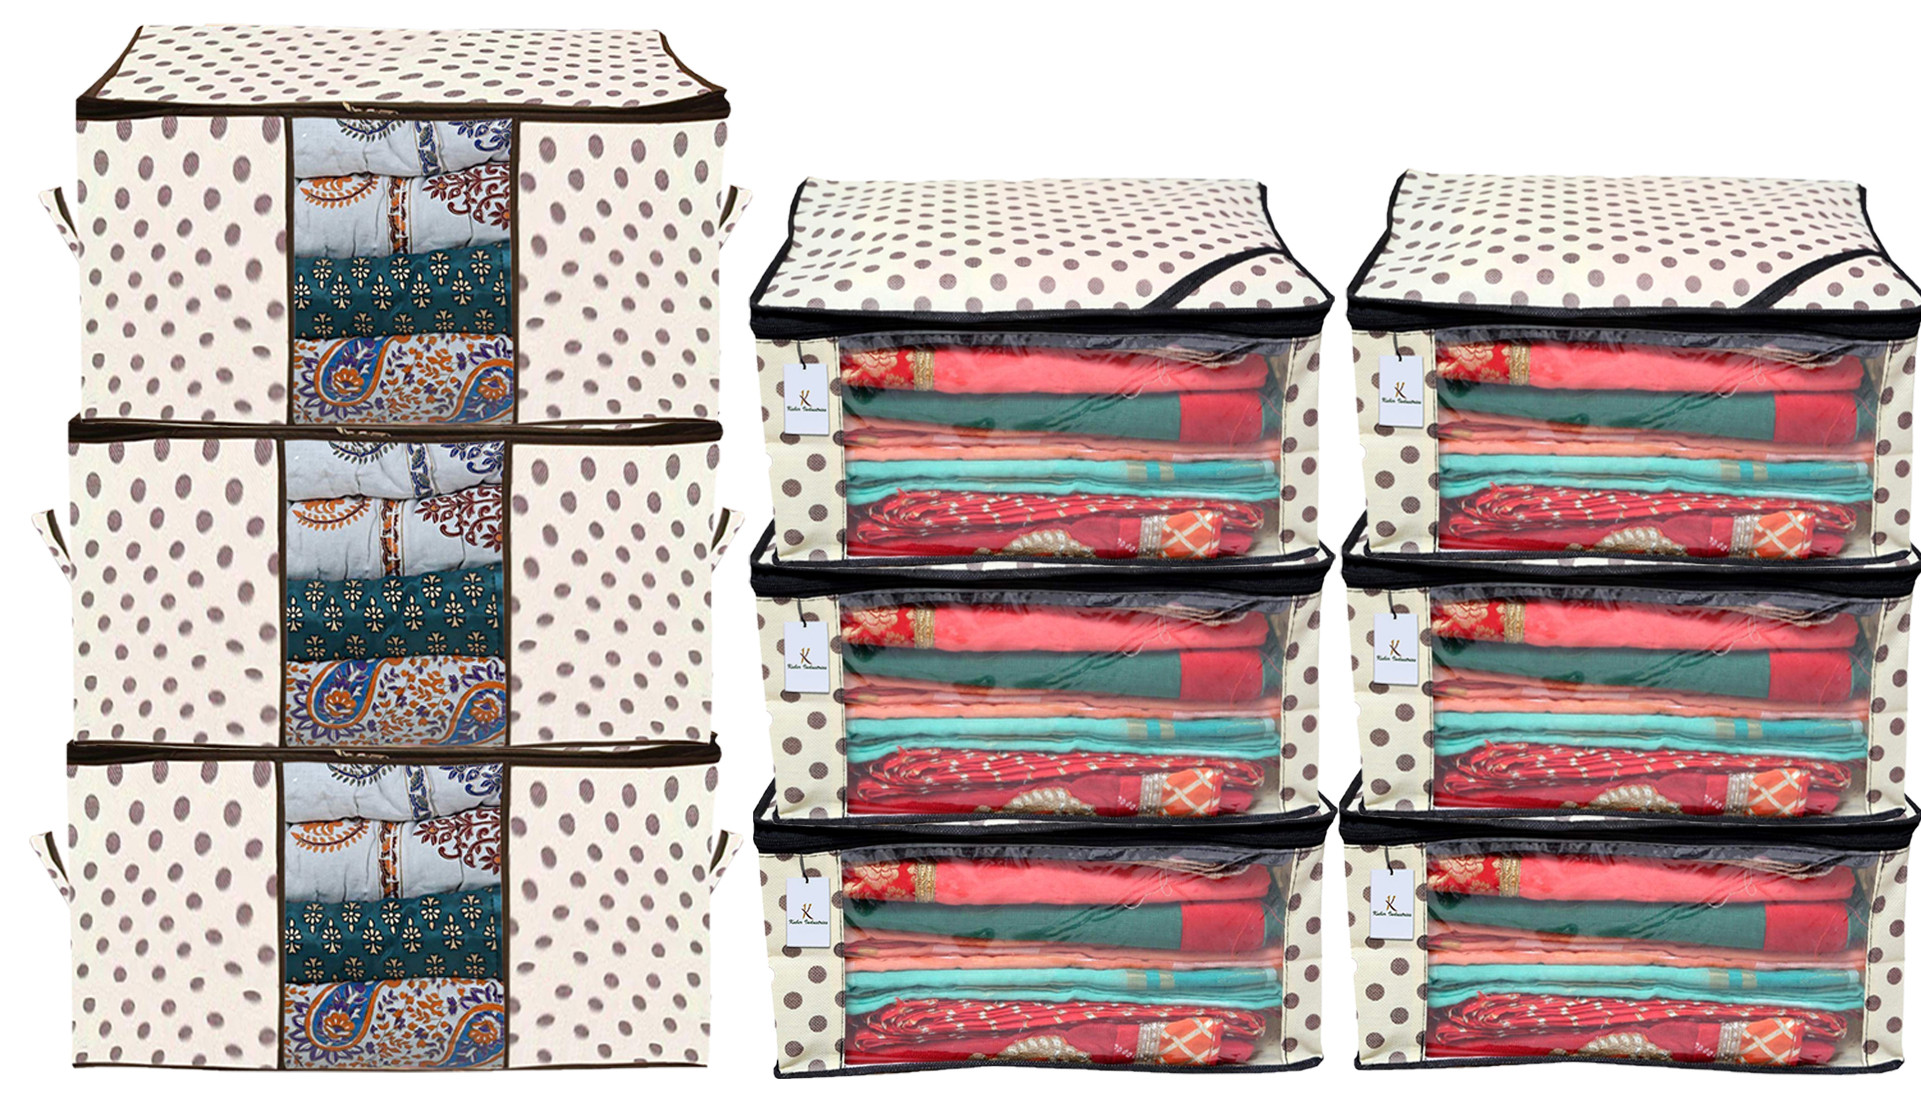 Kuber Industries Polka Dots Printed Non Woven Saree Cover And Underbed Storage Bag, Cloth Organizer For Storage, Blanket Cover Combo Set (Ivory) -CTKTC38643